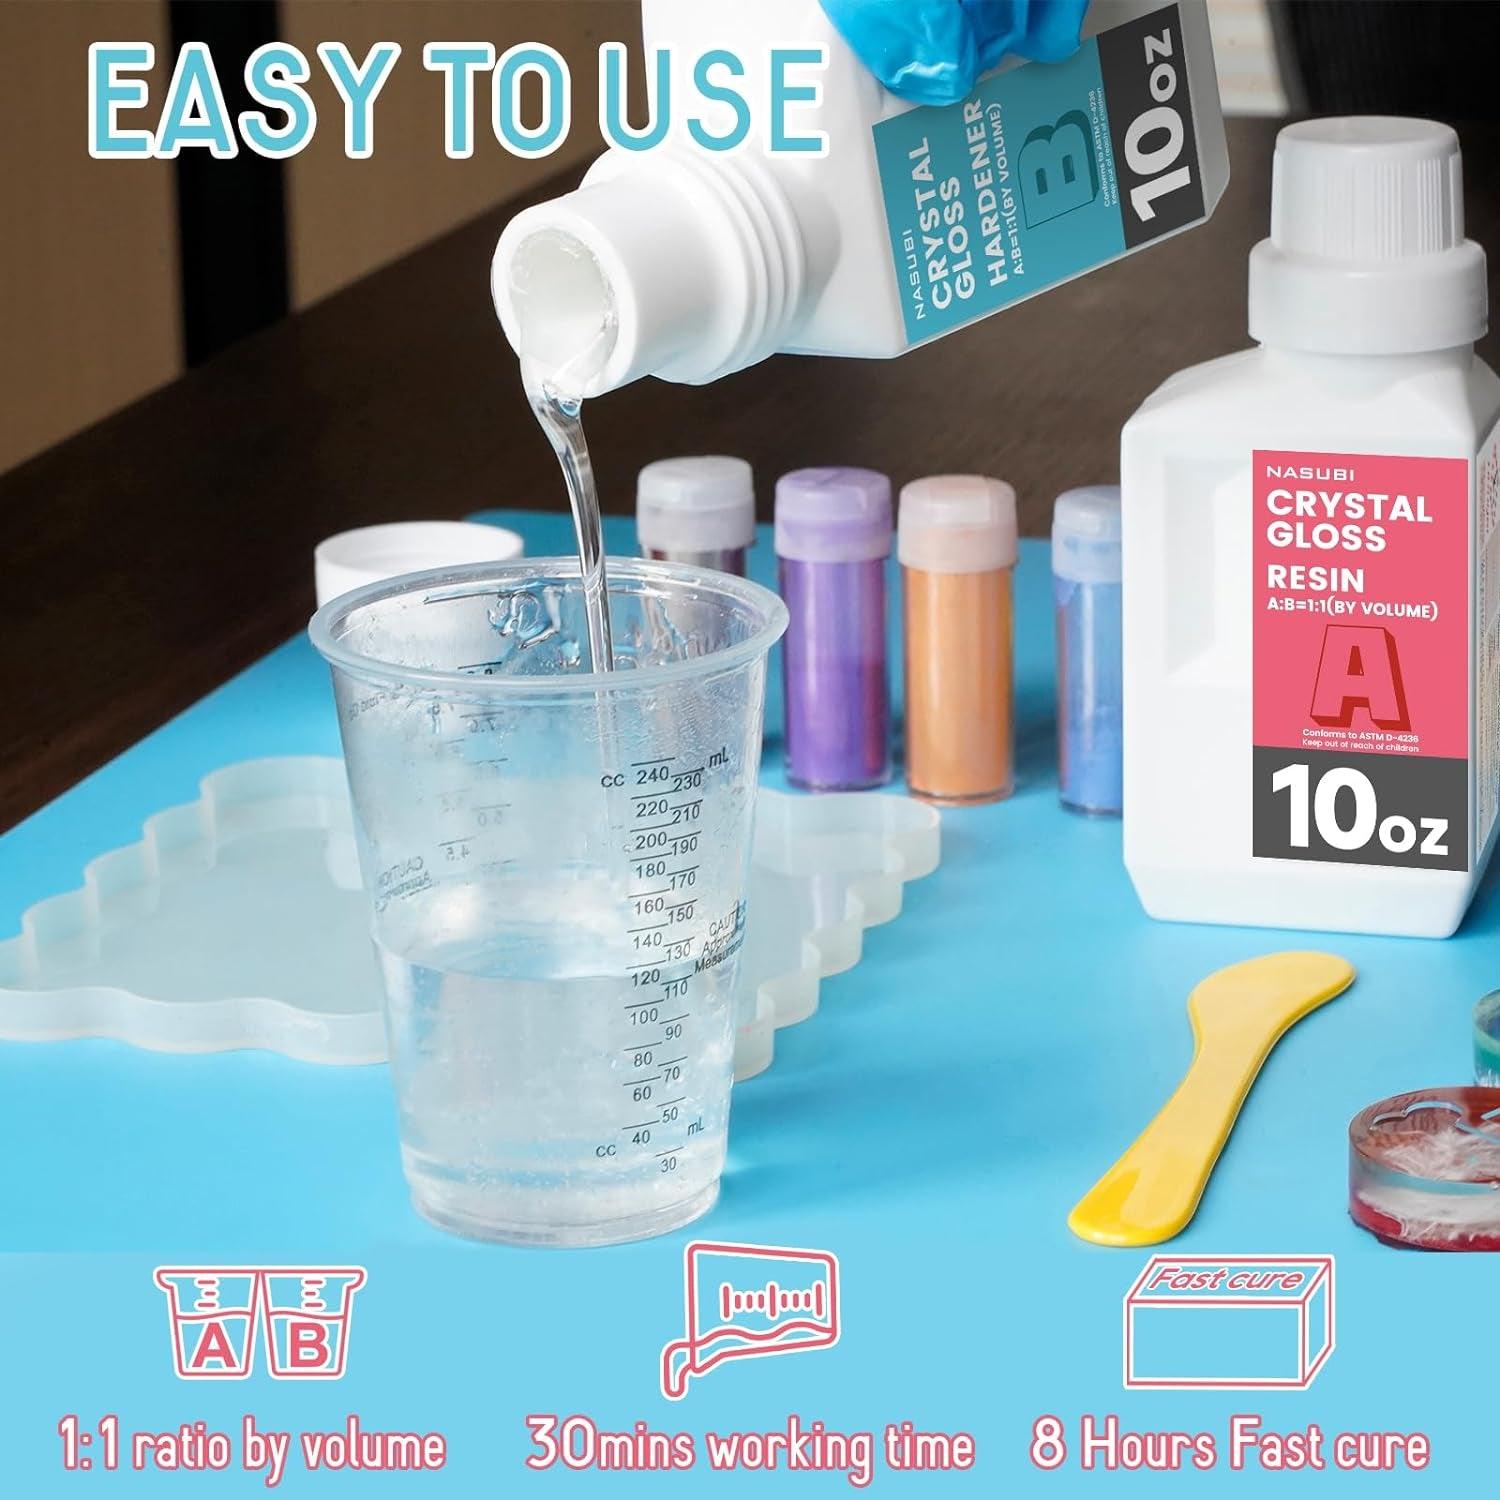 20Oz Clear Resin Epoxy Kit - No Bubble Casting & Coating Epoxy Resin for Crafts, Jewelry Making, Molds - 2 Part Resin for Beginners 10Oz Resin & 10Oz Hardener with 8Oz Measuring Cups, Sticks - WoodArtSupply